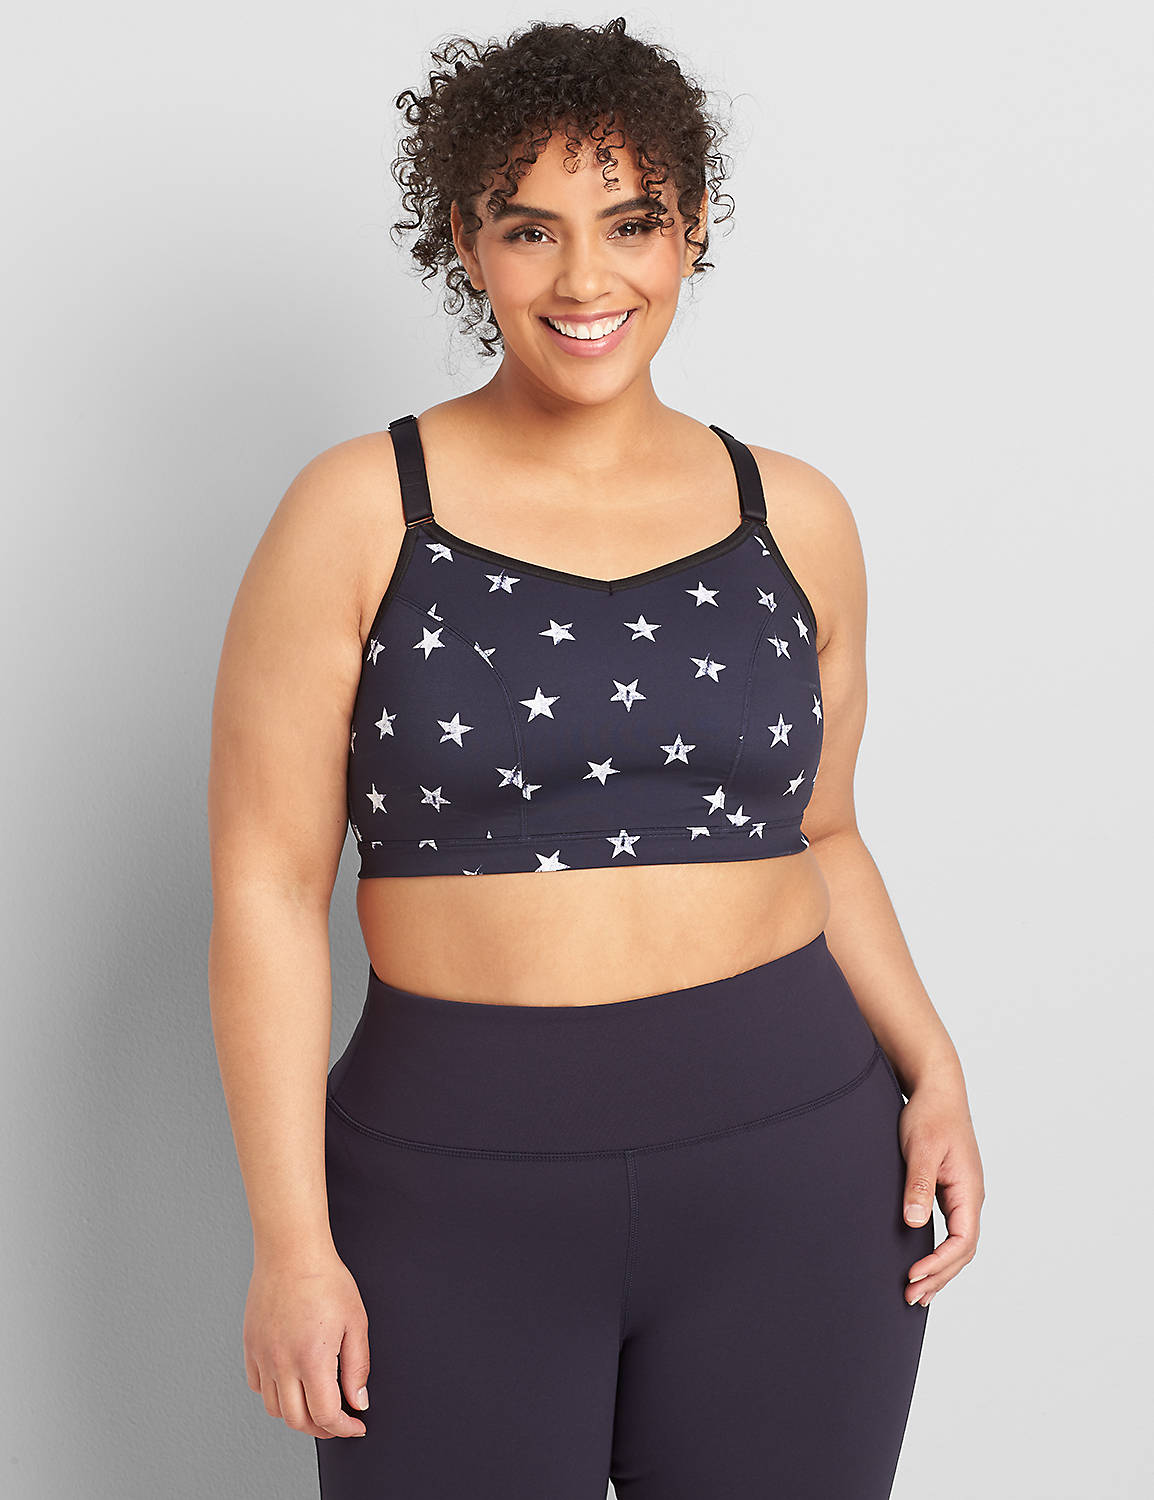 LIVI Wicking Low Impact NW Triple Strappy Back Sport Bra 1112037 F 1118192 S:LBSU21027B_SmallStampedStar_colorway2:14/16 Product Image 1